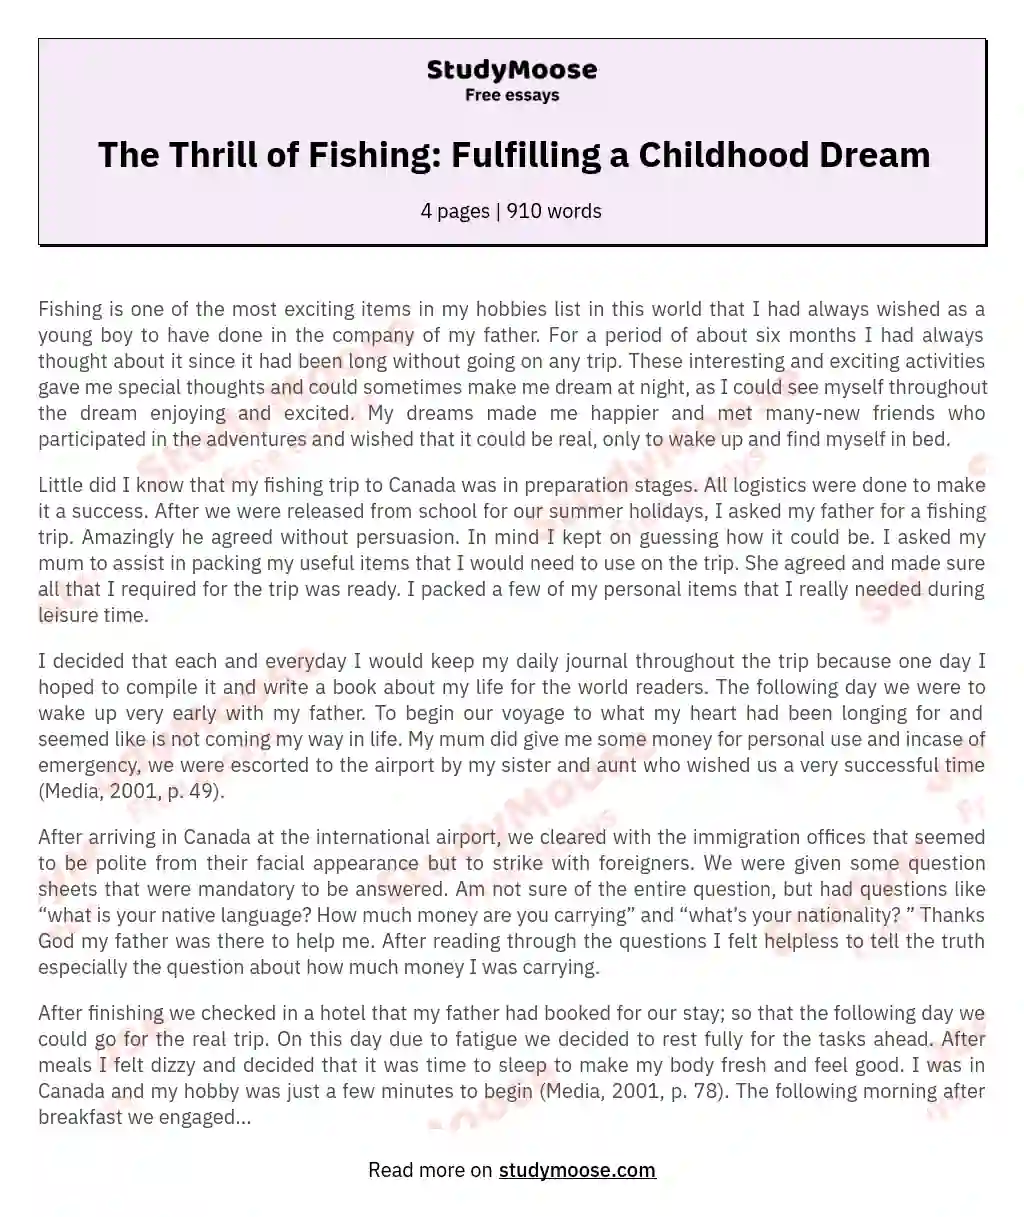 The Thrill of Fishing: Fulfilling a Childhood Dream essay